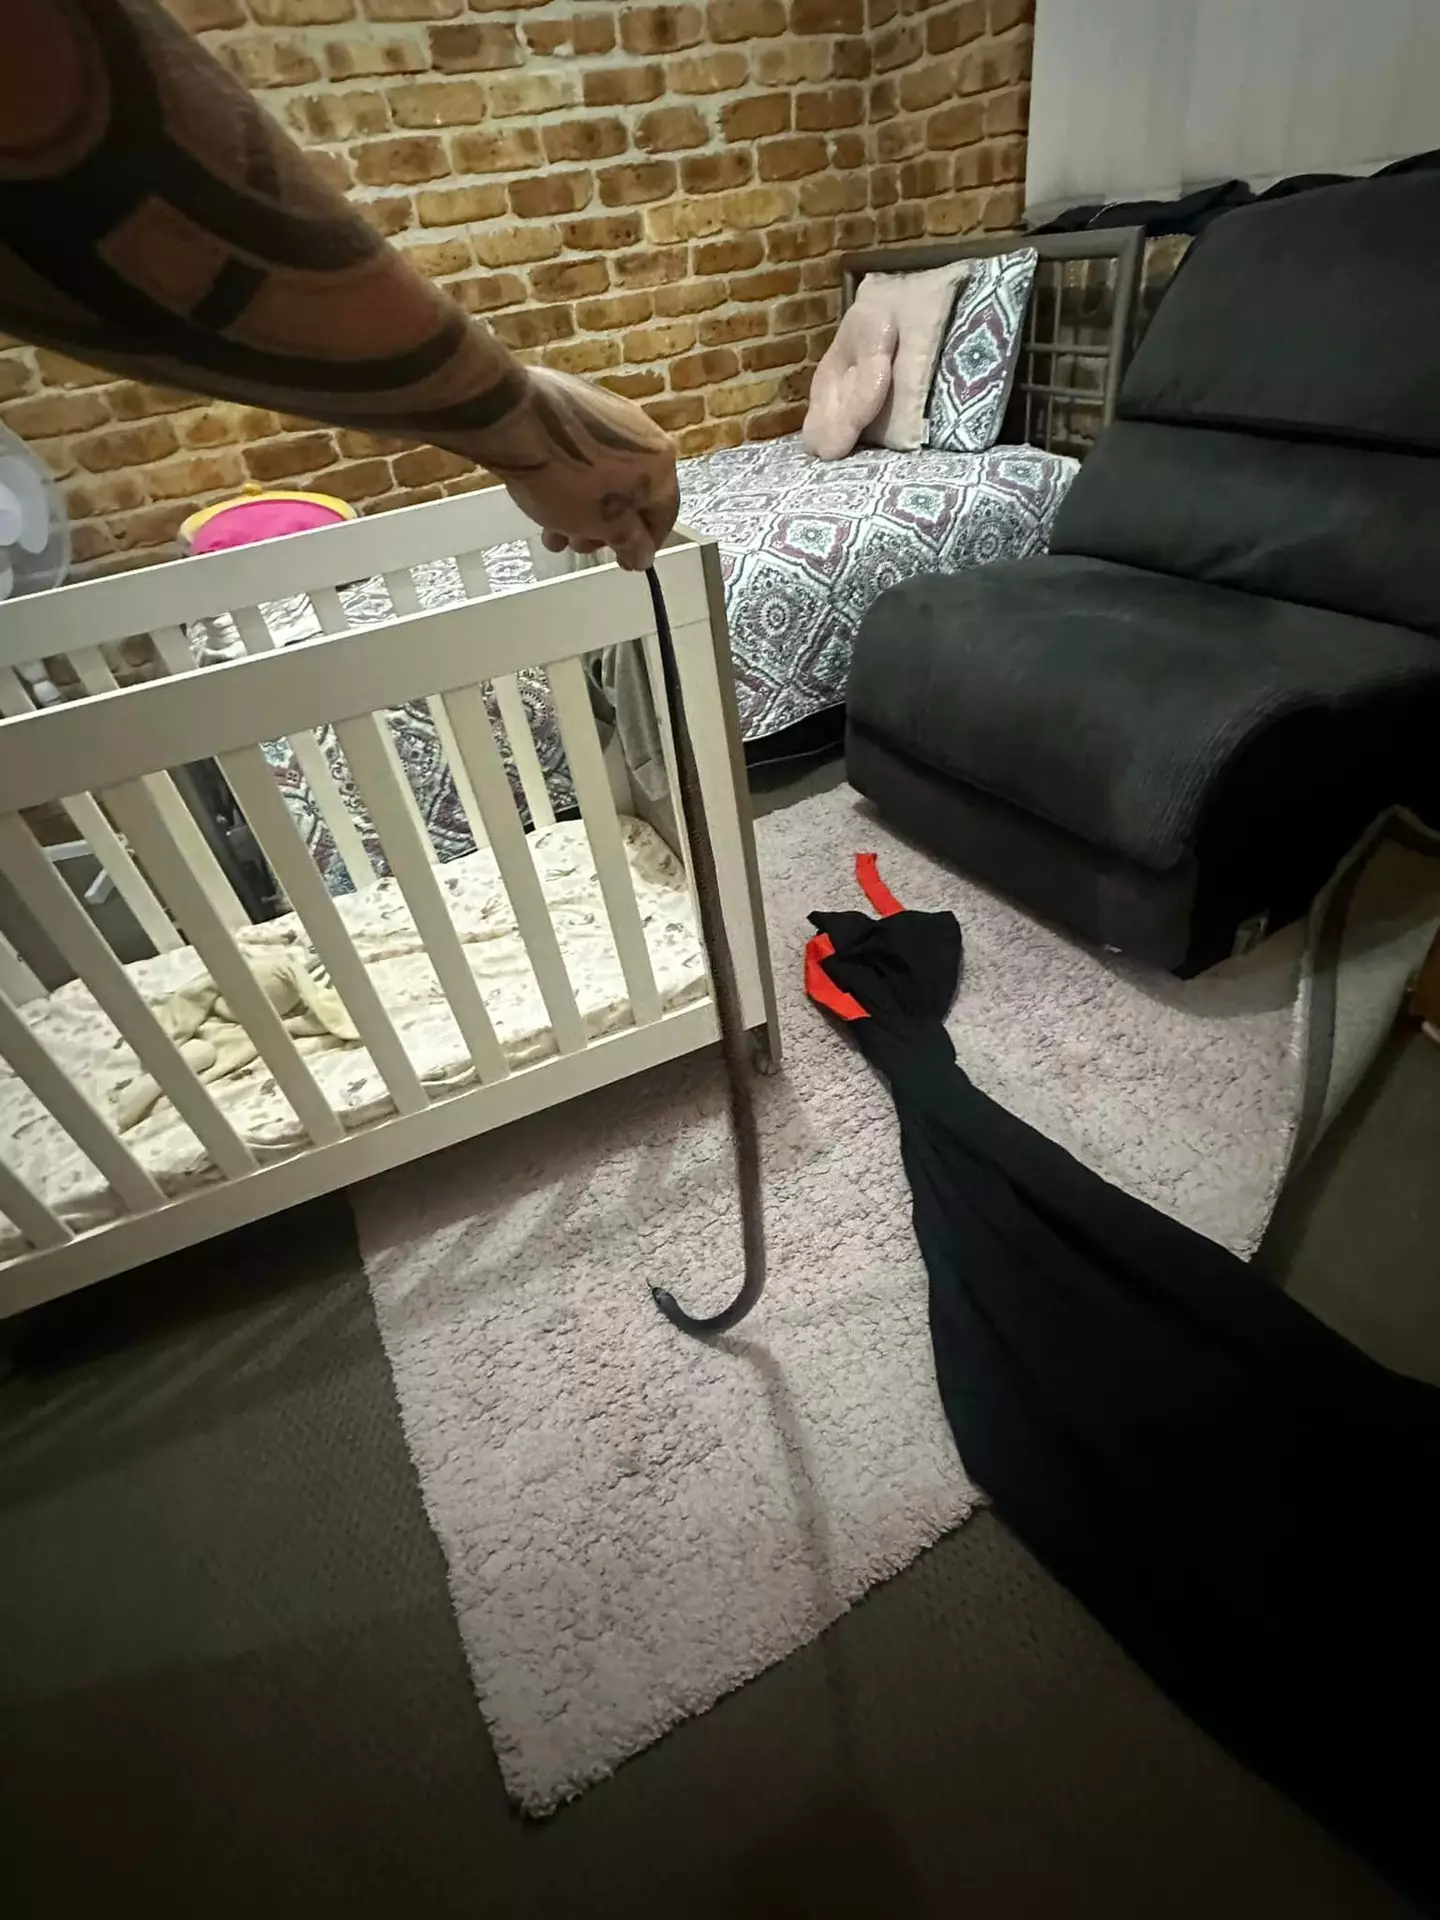 The snake was found under the baby's cot.